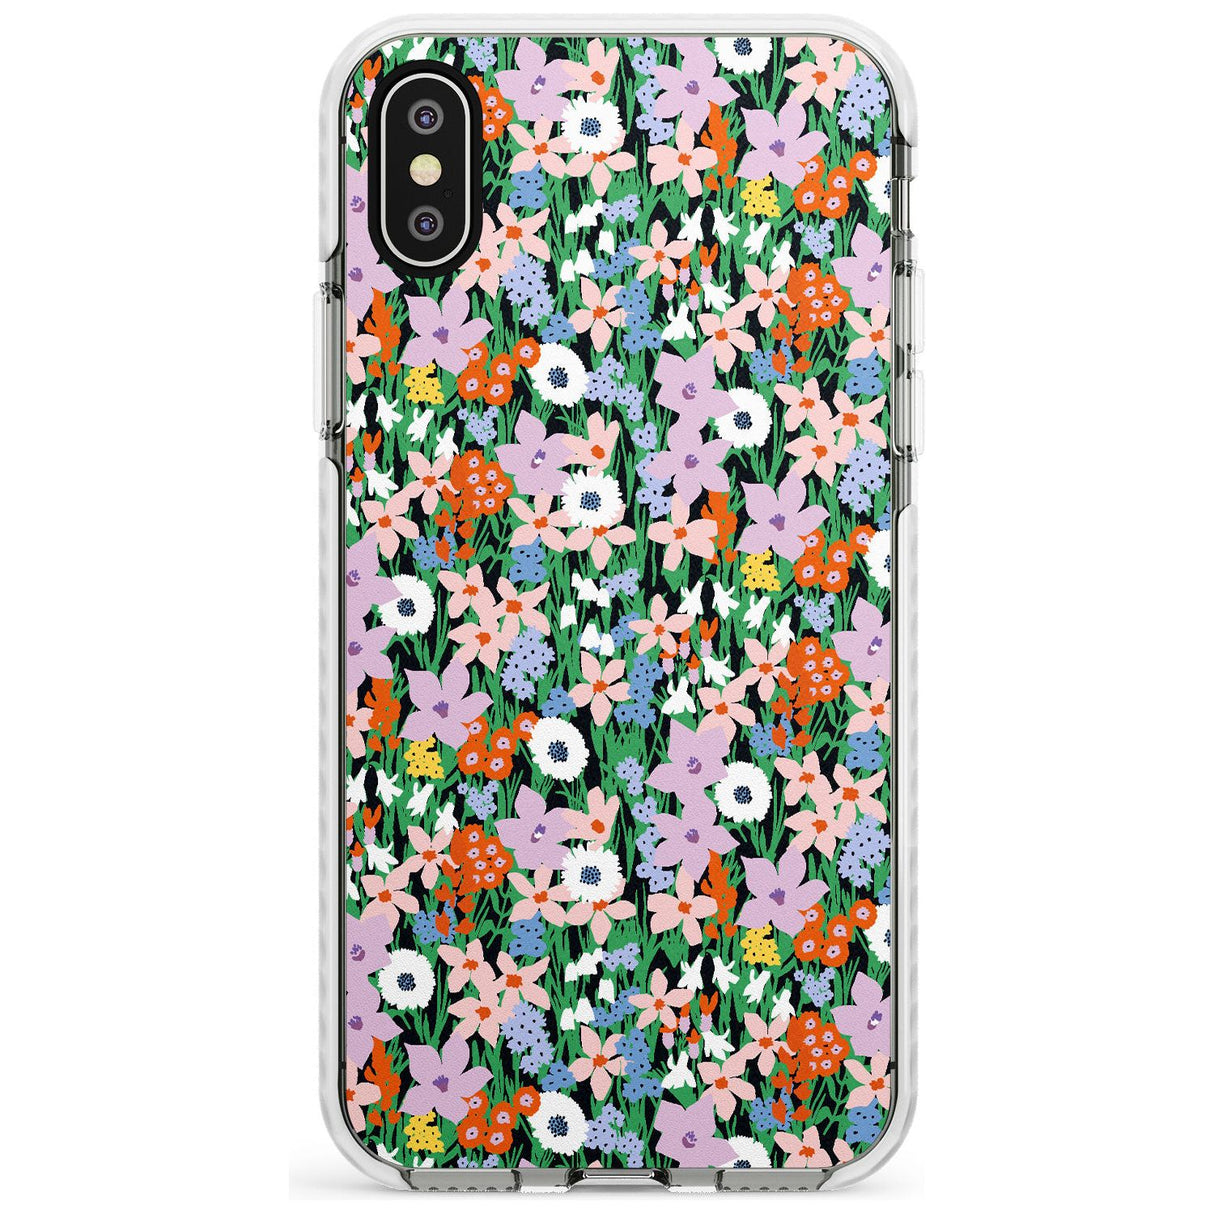 Jazzy Floral Mix: Solid Slim TPU Phone Case Warehouse X XS Max XR